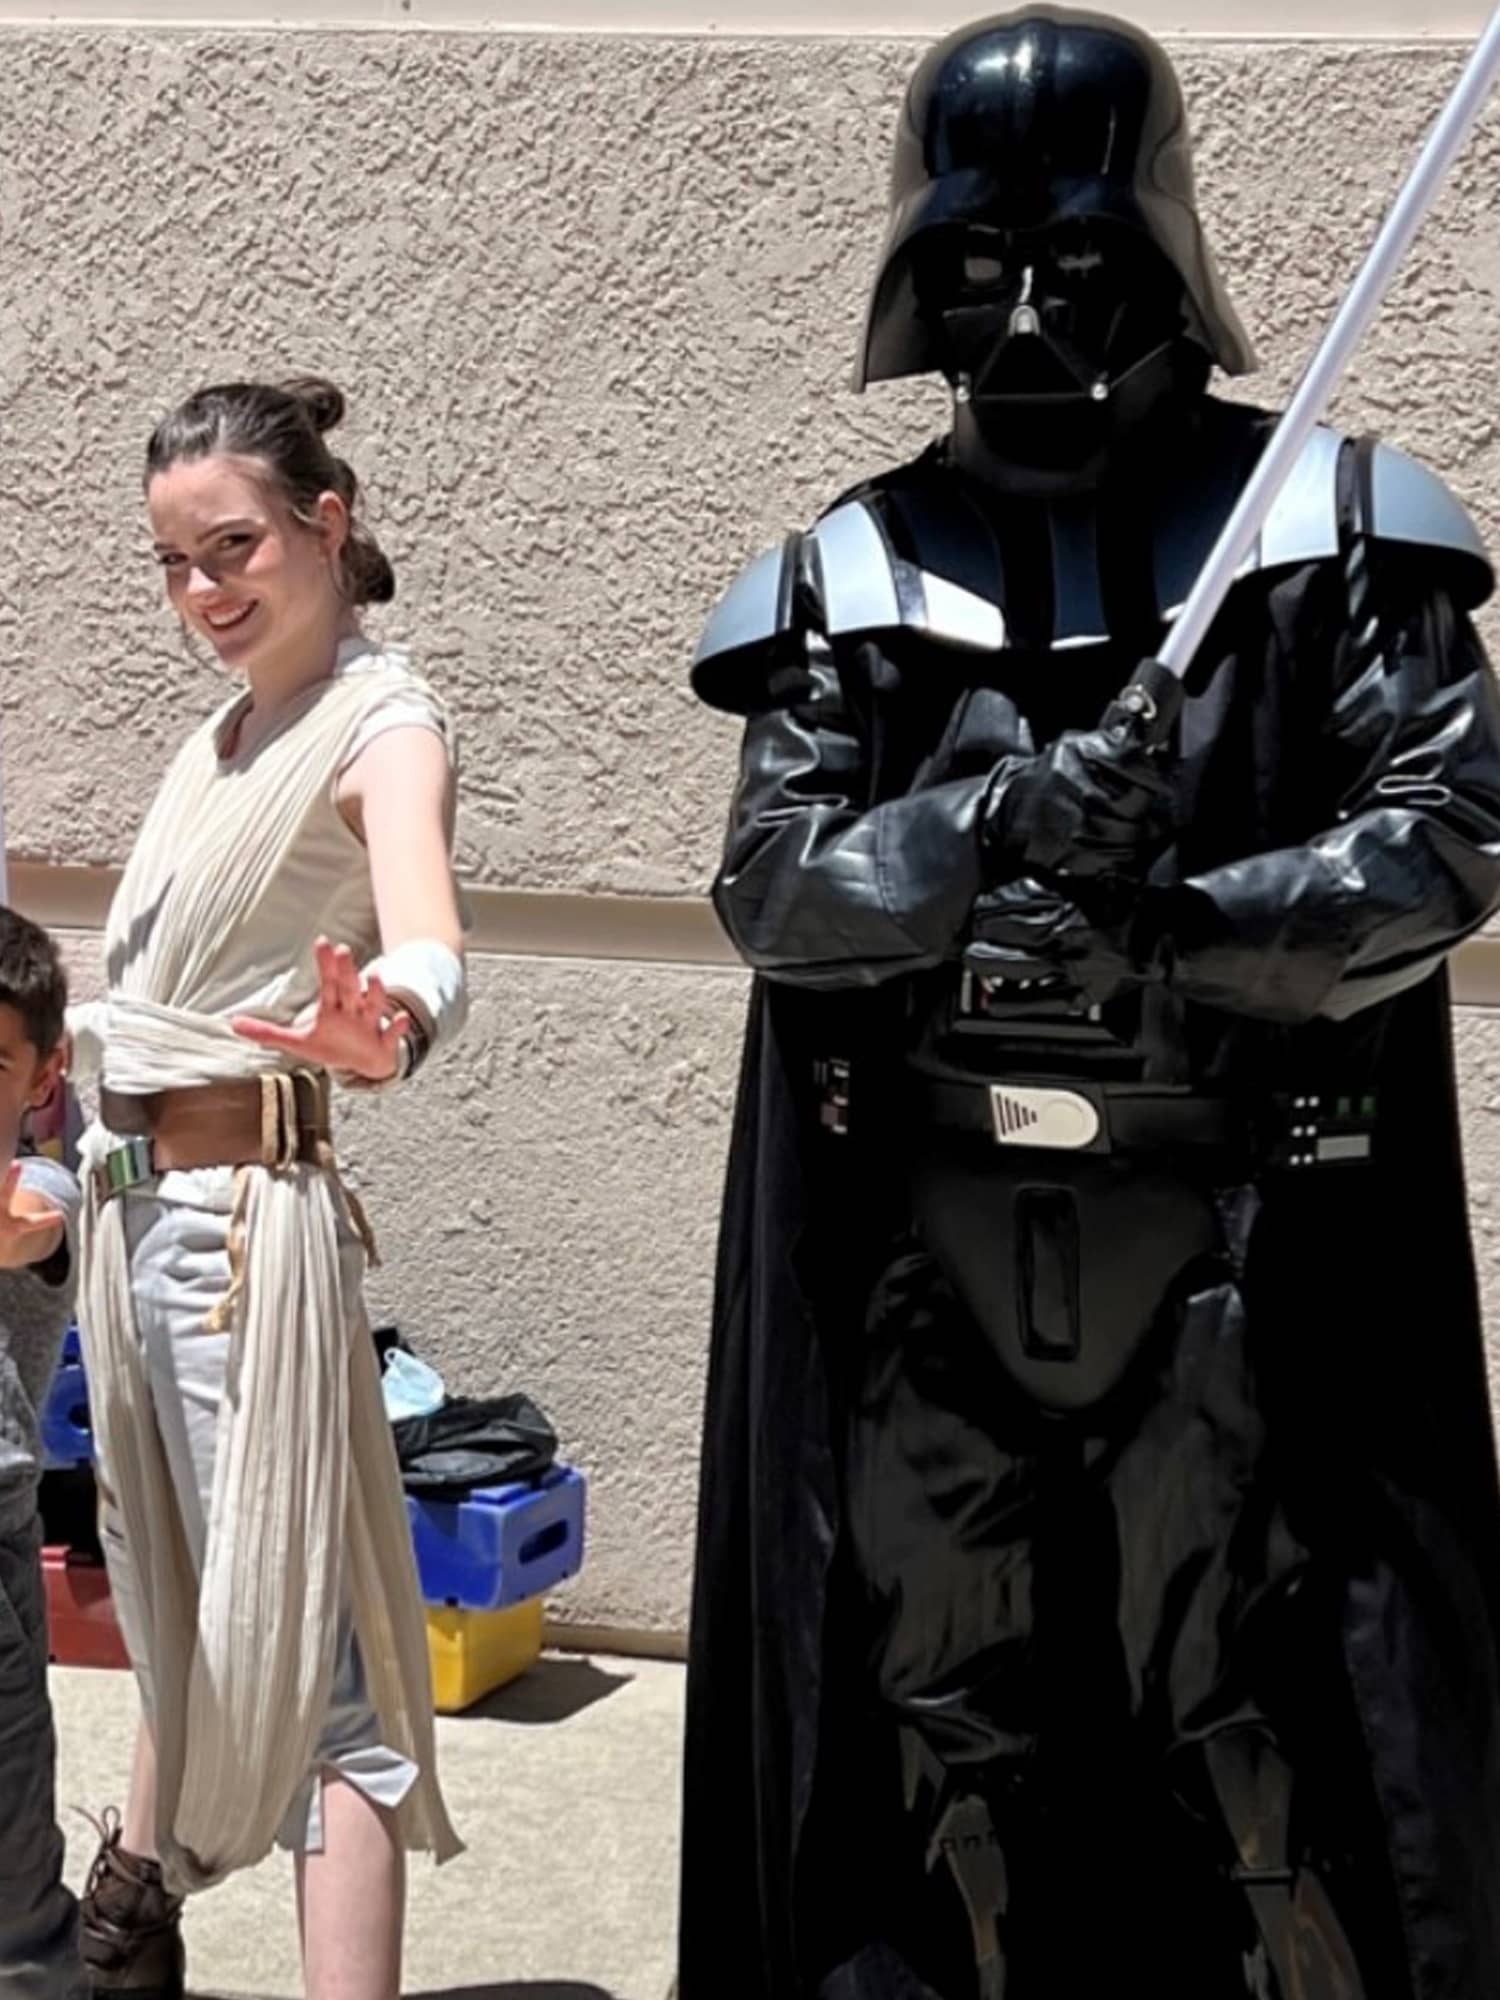 Darth Vader and Rey Skywalker - Star Wars Character Parties in Northern CA